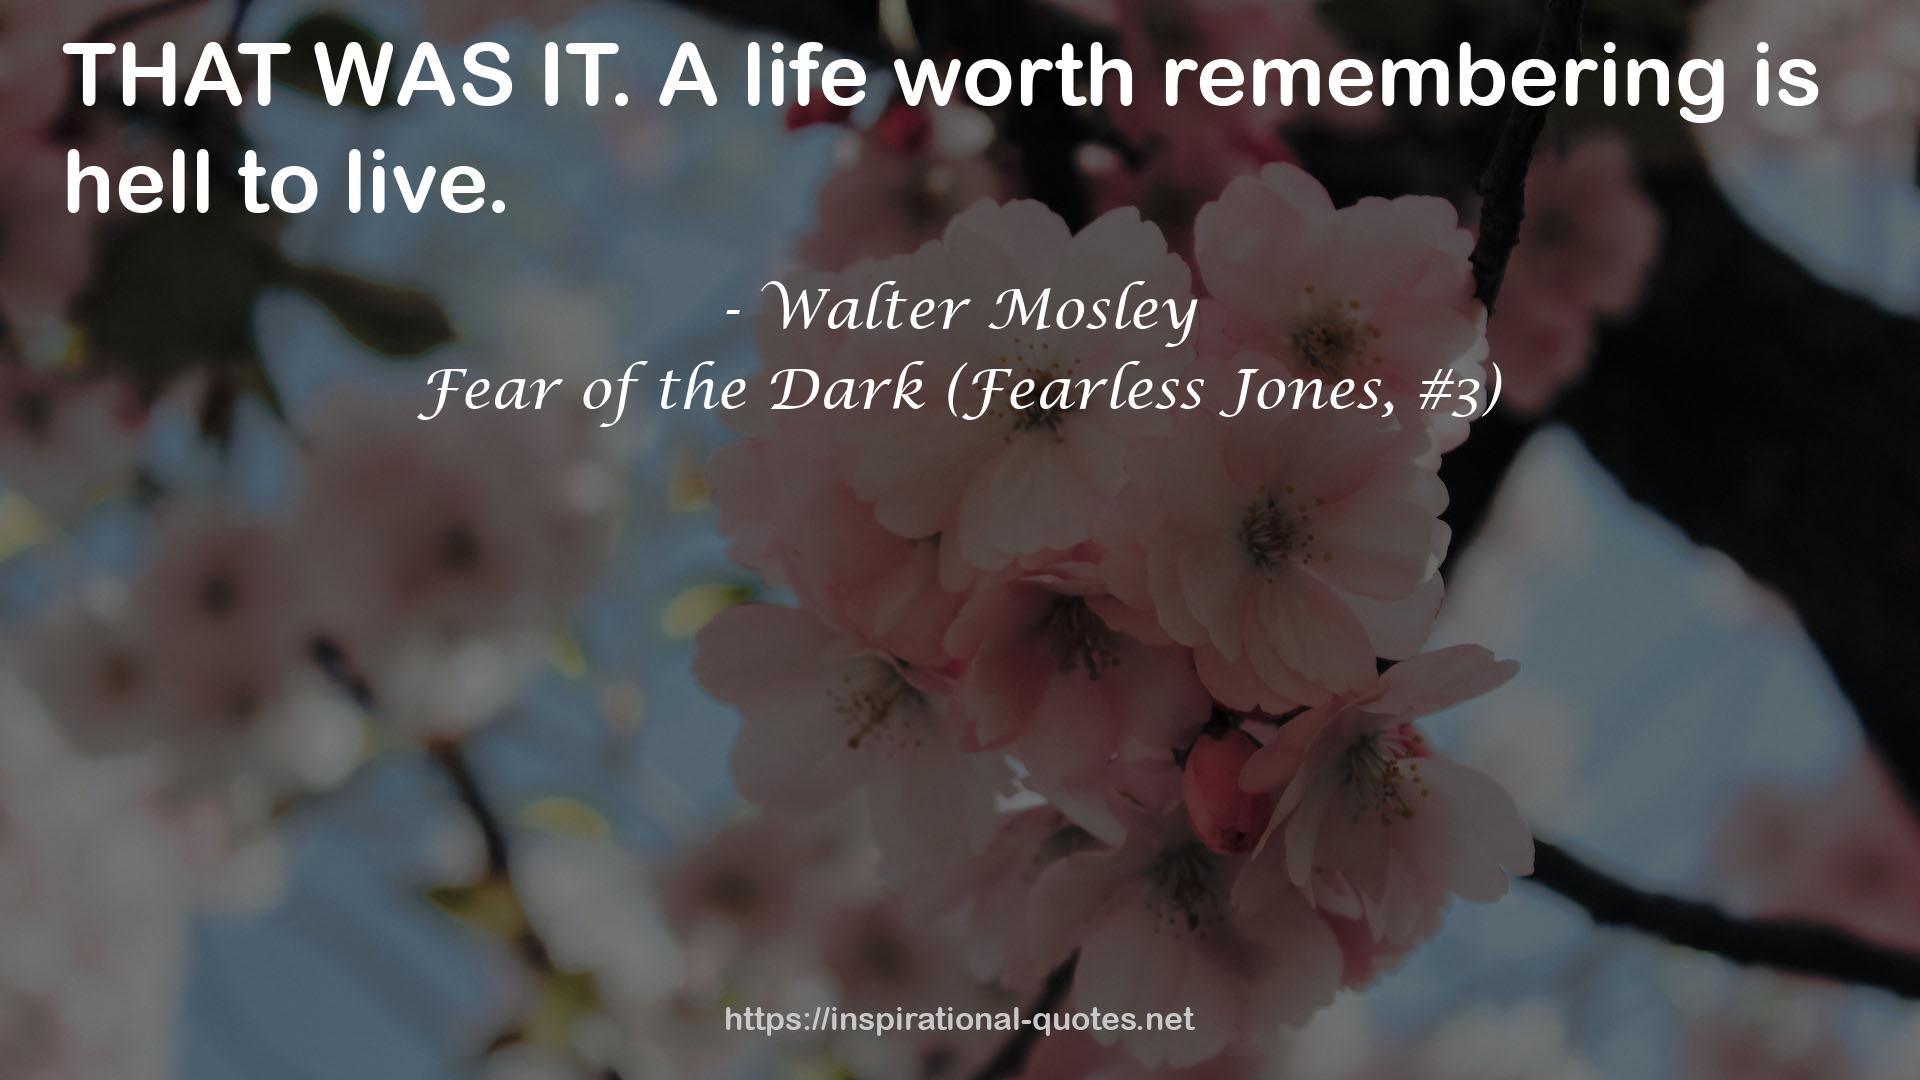 Fear of the Dark (Fearless Jones, #3) QUOTES